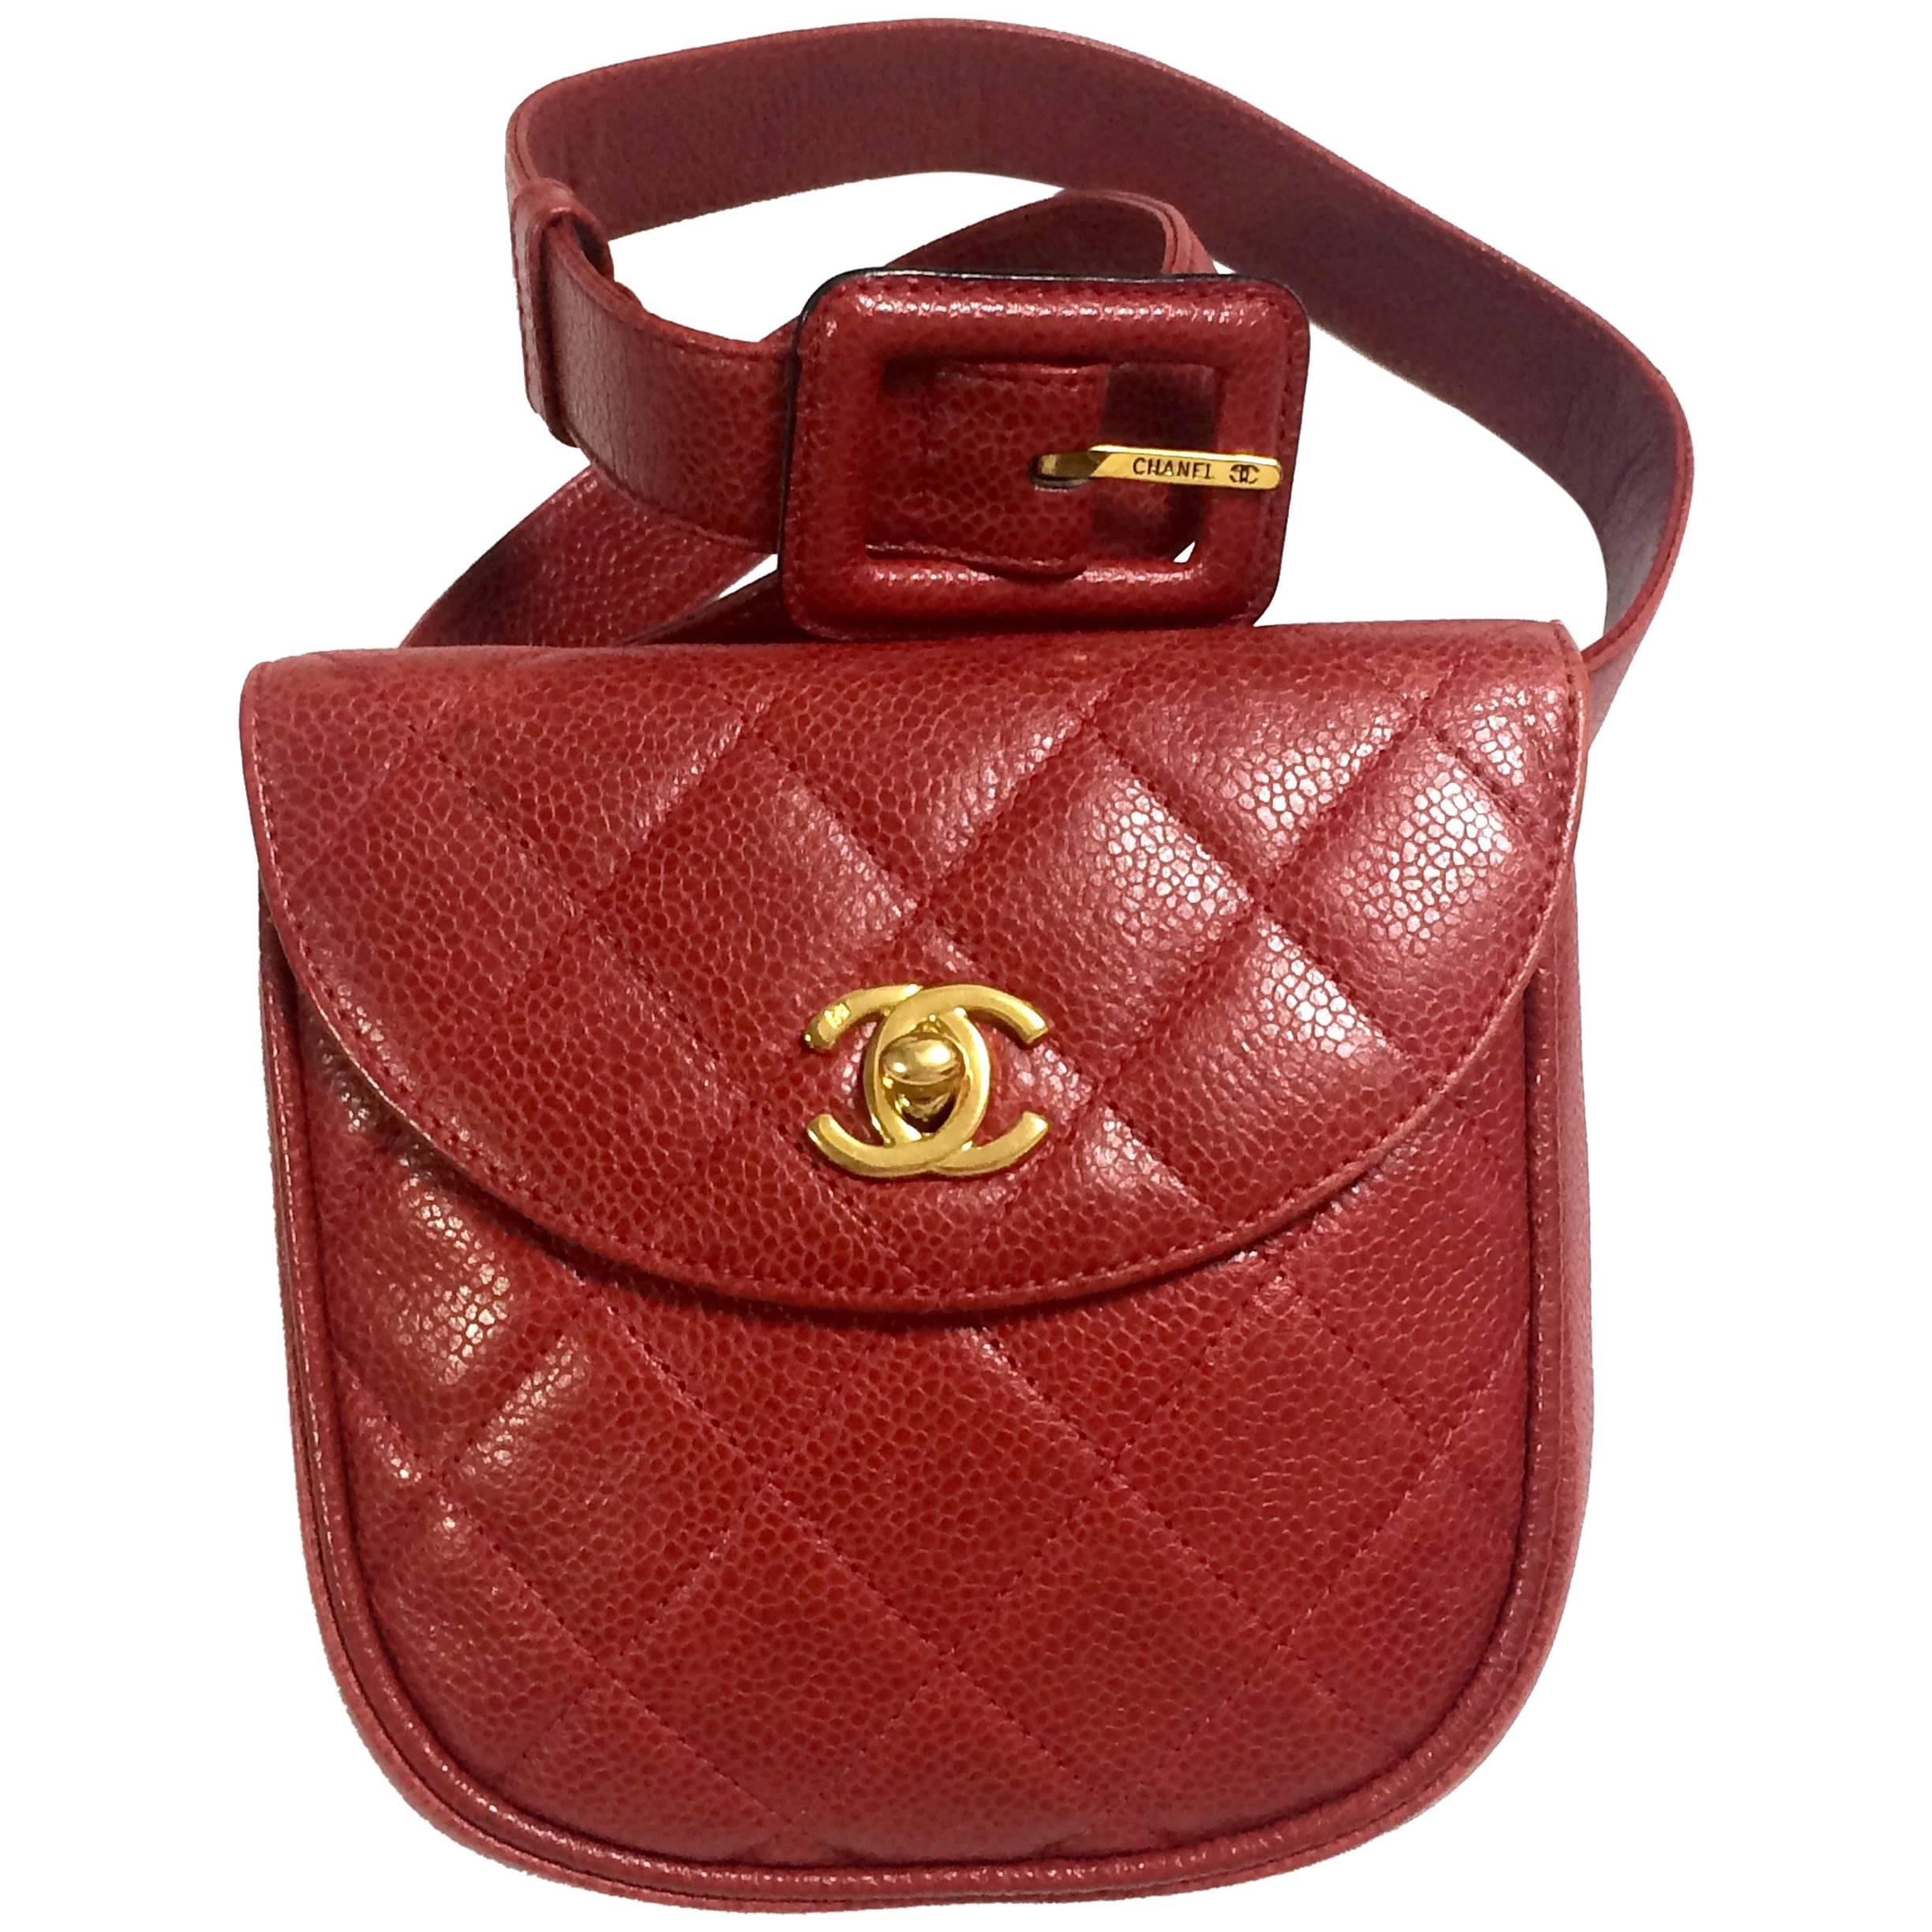 Vintage CHANEL 2.55 red caviar leather waist purse, fanny pack with golden cc.